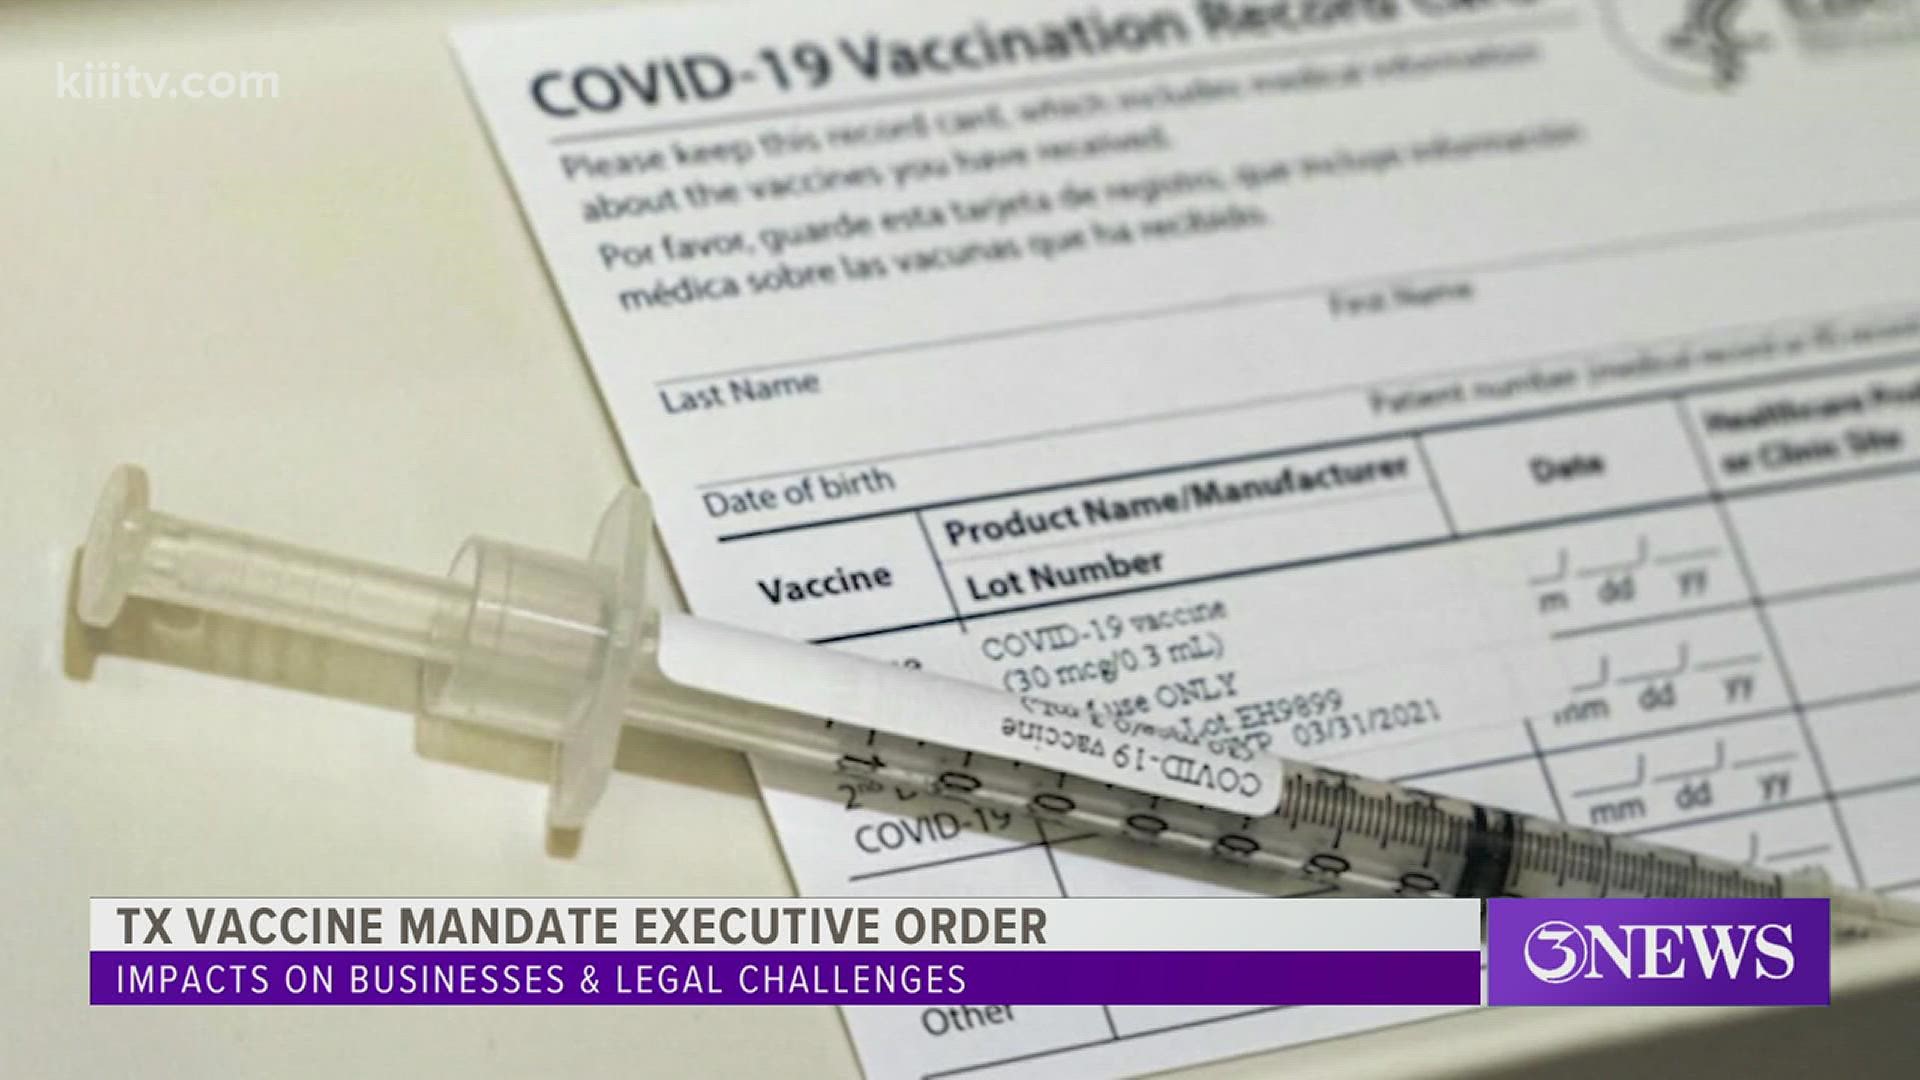 The latest executive order issued Monday by the governor bans vaccine mandates across the state.